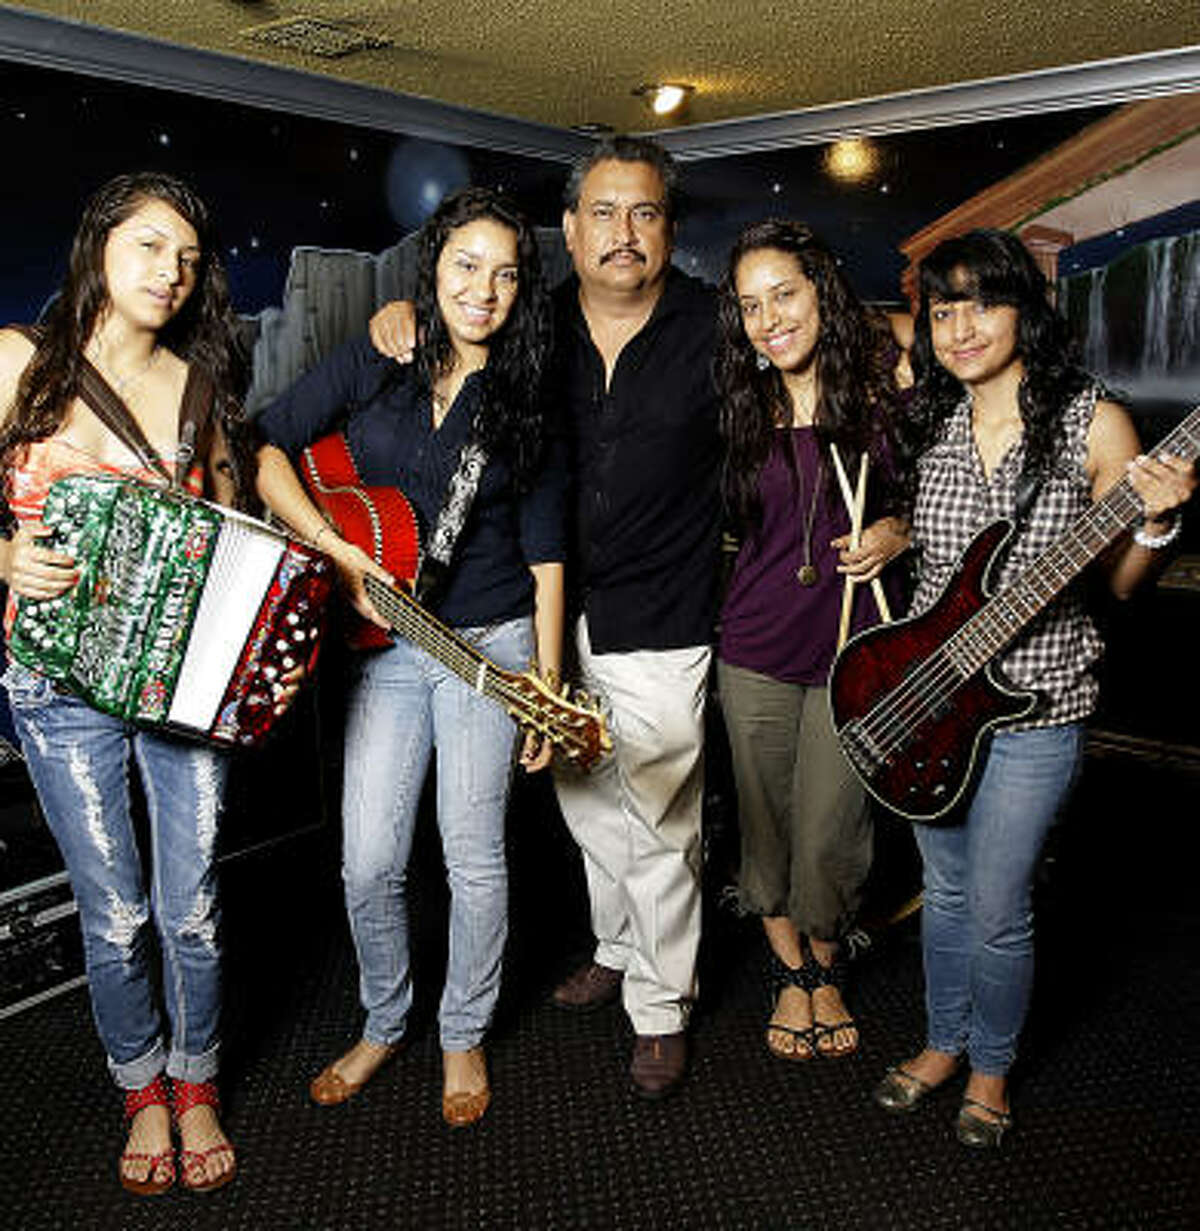 David Rodriguez, shown with the daughters who make up the group Las Fenix, knows he made a good choice all those years ago when he decided to seek his fortune in Houston.